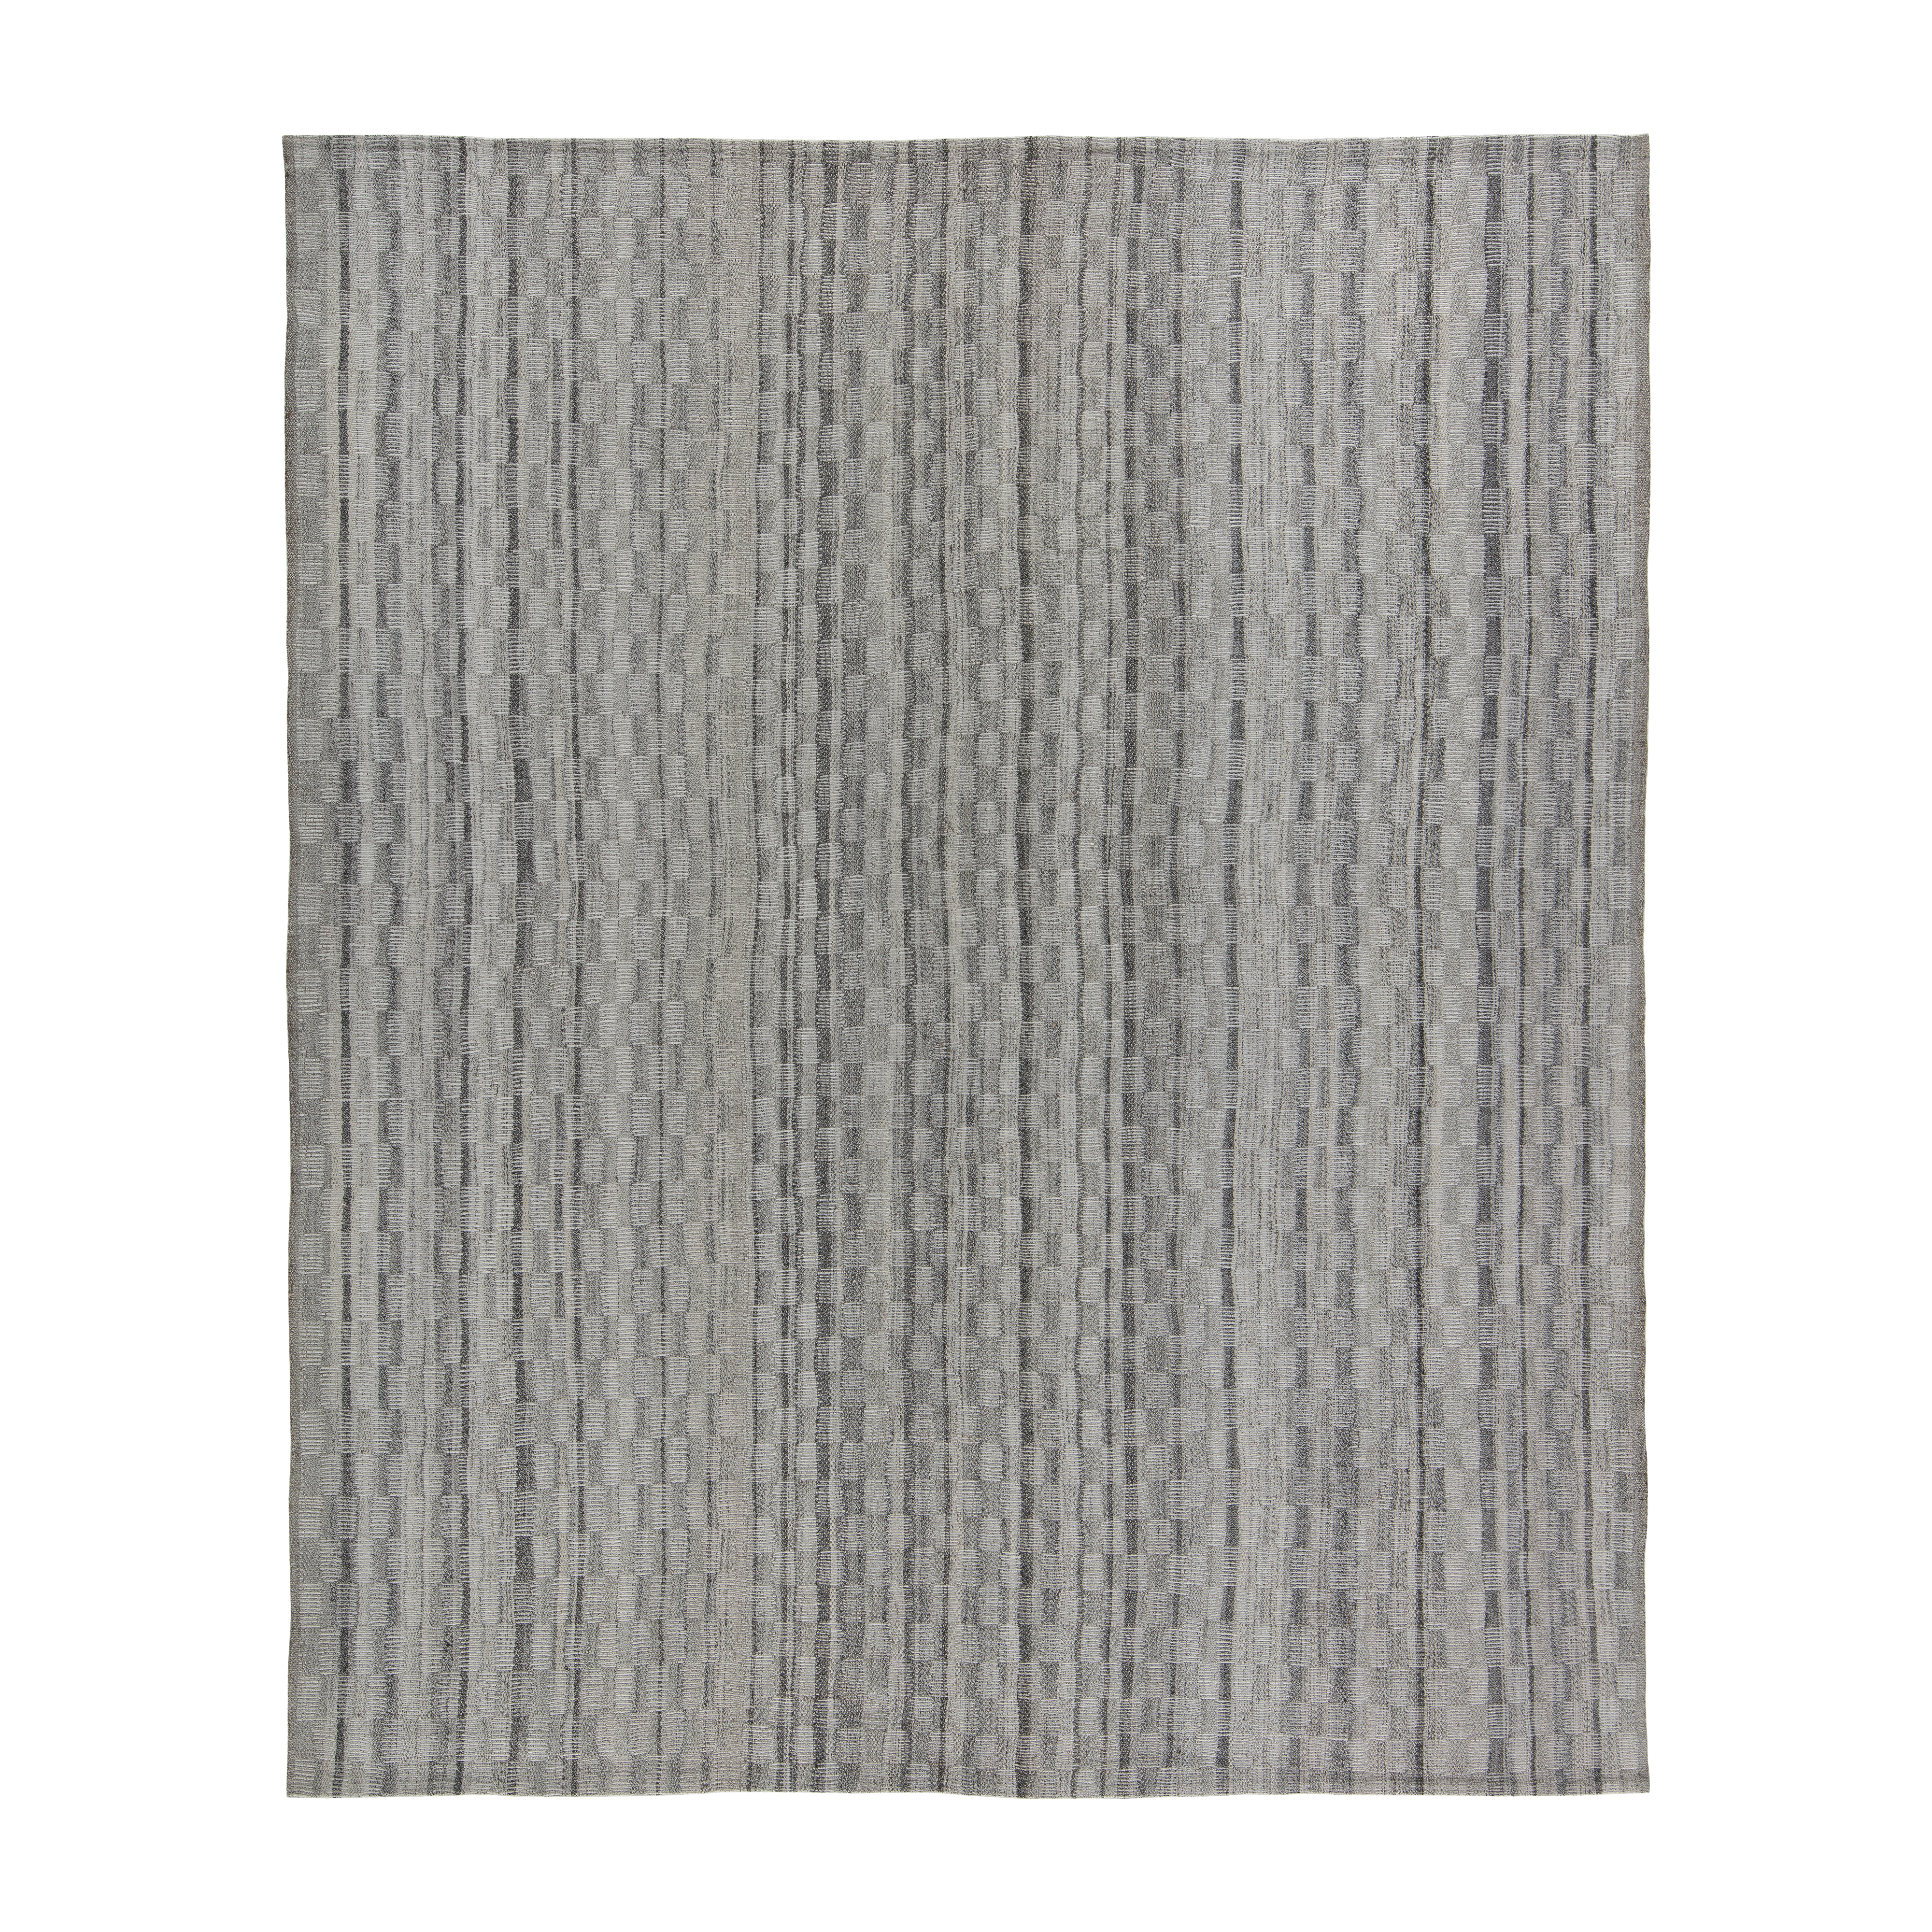 This Pelas Charmo flatweave rug is made with handspun wool and natural dyes. 